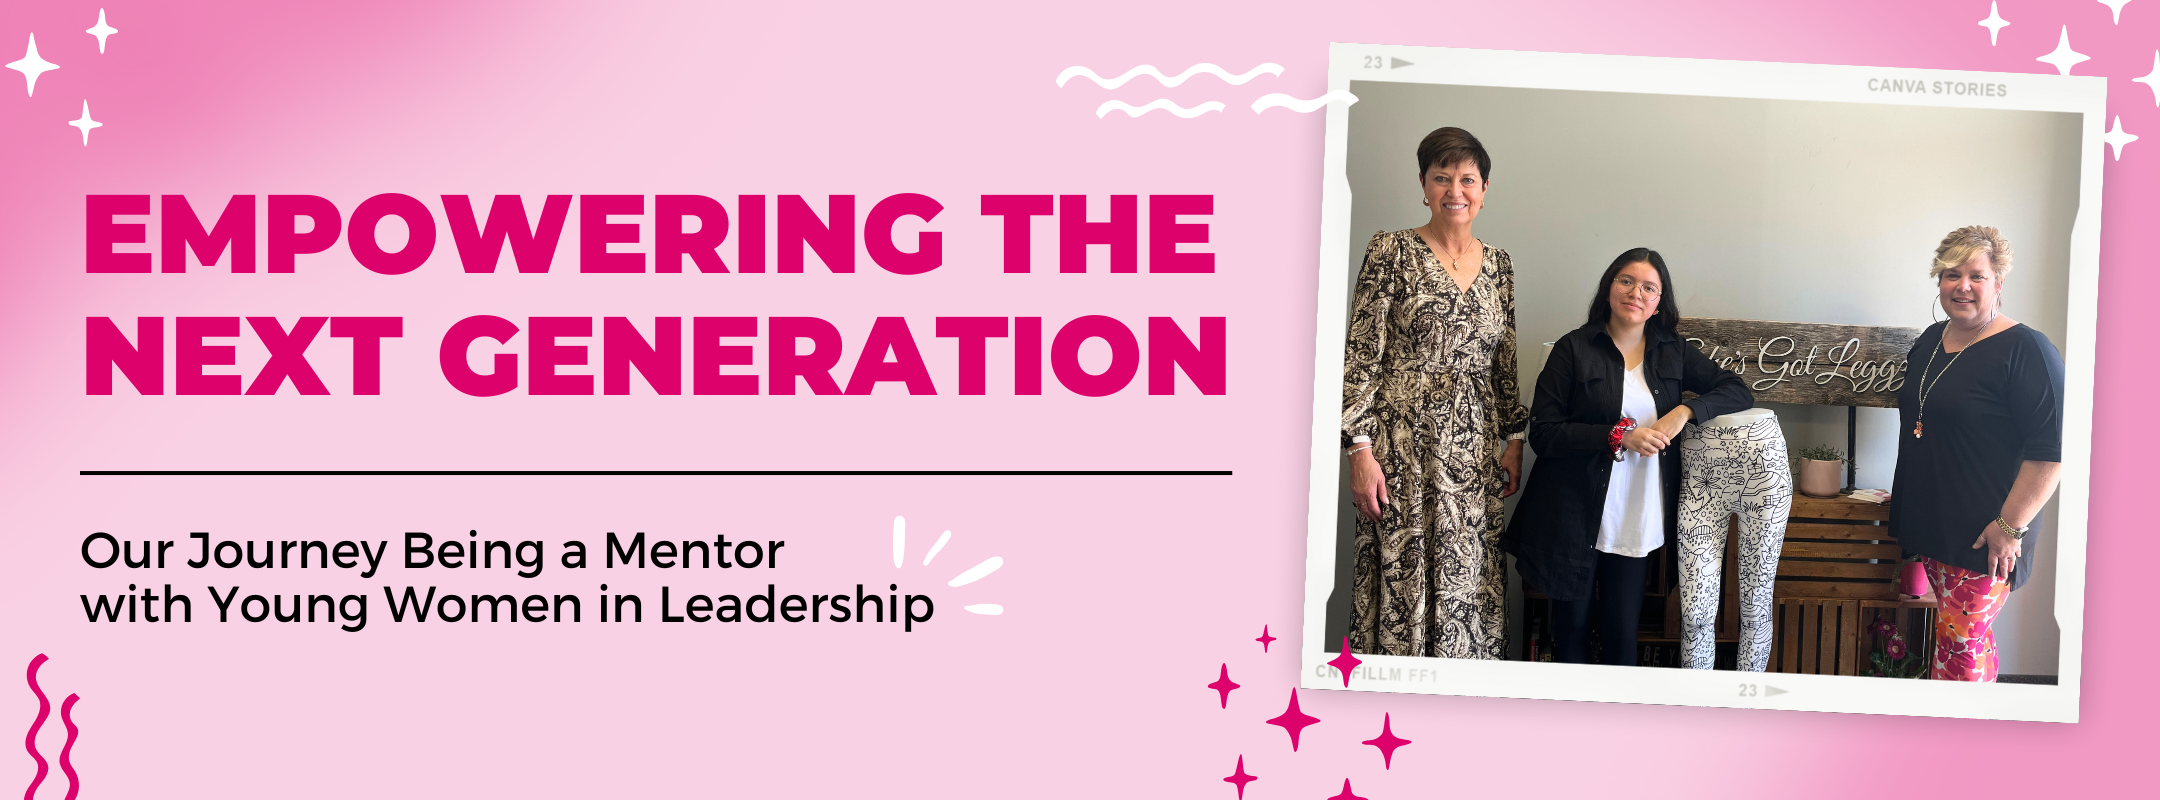 Empowering the Next Generation: Our Journey Being a Mentor with Young Women in Leadership